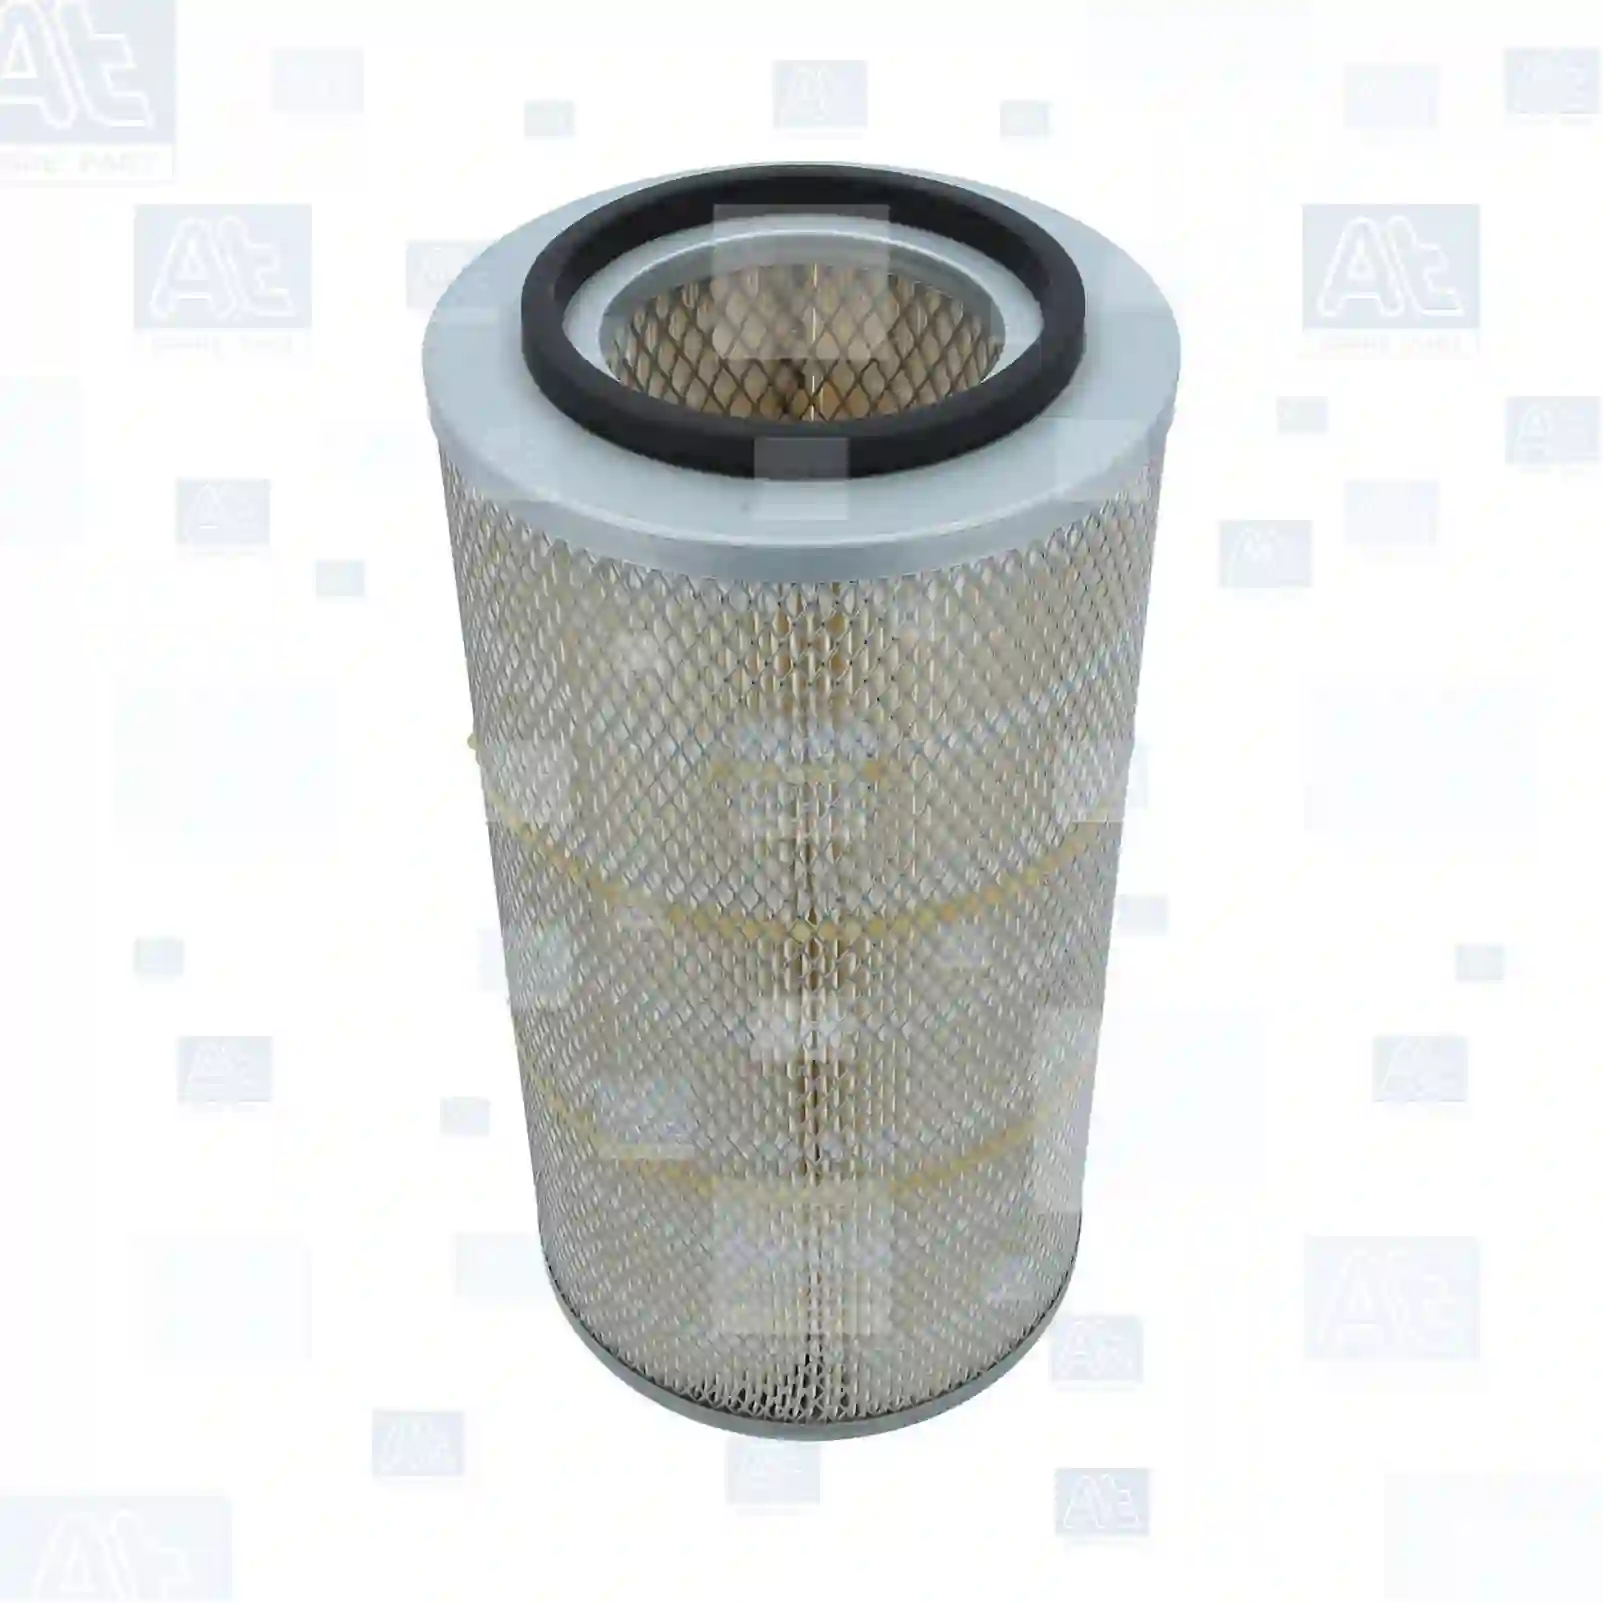 Air filter, 77706038, 8009101116005, 162000190701, 3219420R1, 3219420R91, 3226416R1, 326416R1, 402219502, 87704243, E155526, 3I-0337, 10944204, 10945204, 130941802, 20940004, 0000677400, 0006774340, 0006774341, 153174, 3353440, 0265045, 0289829, 1500299, 265045, 288756, 289829, 396075, ABU8525, 00405174, 29504376, 43262500, 43264500, 988585, 98858500, 00019922, 01186046, 01902077, 02165049, 03018372, 1210702019500, 12153221, 13002B1810, 605412970034, 606901670116, 8009101116005, 190537, 645372, 1210702019500, 0746369, 1470629, 4134366, F184230090050, 01186046, 01902077, 02165049, 04776902, 07124343, 07140539, 08321421, 08323326, 08323337, 08323338, 08323339, 08323340, 09987150, 40278720, 42078290, 75247062, Y03720711, Y05776111, 5011321, 5011552, DNP771561, 265045, 9307846, 94613436, 9974139, 25041936, 25041956, 25041957, 9974139, 3219420R1, 3226416R1, 1-3002B181-0, 00190537, 00645372, 00691351, 01186046, 01902077, 02165049, 04207829, 04776902, 08323326, 08323337, 08323338, 08323339, 08323340, 09987150, 1902077, 2165049, 42078290, 8323326, 8323337, 8323338, 8323339, 8323340, 41AJ58184, AZ30575, AZ30757, DQ43483, PE10011906, PE10011908, 34000489, 01186046, 01902077, 02165049, 01186046, 04776902, 09987150, 5106189, 7360753, 736075380, 04532555104, 04532555105, 04532592304, 08183040055, 62000190701, 81083016278, 81083040049, 81083040055, 81083040056, 82083040055, 022186T1, 677434C0, 0001945204, 0010944204, 0010945201, 0010945204, 0010945304, 0020940004, 0130941802, 0230000207, 3410947004, 3440947104, 605412970010, 605412970034, 606901670116, 00822421, 16546-27610, 190537, 645372, 691351, 0250591, 150591, 150599, 2412429, 250591, 850501, G0250591, G250591, L0350530, L350530, 61200190037, 99000190701, 0003563512, 0003564512, 0004212747, 0004214313, 0024551184, 0060377200, 0500241796, 5000241756, 5000241796, 6005019667, R940, 5106189, ABU8525, 4631072, 218989, 8319009084, 8319069084, 162000190701, 61200190037, 62000190701, 99000190701, 195946216, 351920, 802705, 80270500, 82636000, 82640600, CH12385, 2165049, 217362224, 362224, 3622243, 3622248, 3950728, 4780961, 4782961, 7362224, 73622243, 7362244, 900691, 9207230002, 140503286, T2D129620, 931353, ZG00849-0008 ||  77706038 At Spare Part | Engine, Accelerator Pedal, Camshaft, Connecting Rod, Crankcase, Crankshaft, Cylinder Head, Engine Suspension Mountings, Exhaust Manifold, Exhaust Gas Recirculation, Filter Kits, Flywheel Housing, General Overhaul Kits, Engine, Intake Manifold, Oil Cleaner, Oil Cooler, Oil Filter, Oil Pump, Oil Sump, Piston & Liner, Sensor & Switch, Timing Case, Turbocharger, Cooling System, Belt Tensioner, Coolant Filter, Coolant Pipe, Corrosion Prevention Agent, Drive, Expansion Tank, Fan, Intercooler, Monitors & Gauges, Radiator, Thermostat, V-Belt / Timing belt, Water Pump, Fuel System, Electronical Injector Unit, Feed Pump, Fuel Filter, cpl., Fuel Gauge Sender,  Fuel Line, Fuel Pump, Fuel Tank, Injection Line Kit, Injection Pump, Exhaust System, Clutch & Pedal, Gearbox, Propeller Shaft, Axles, Brake System, Hubs & Wheels, Suspension, Leaf Spring, Universal Parts / Accessories, Steering, Electrical System, Cabin Air filter, 77706038, 8009101116005, 162000190701, 3219420R1, 3219420R91, 3226416R1, 326416R1, 402219502, 87704243, E155526, 3I-0337, 10944204, 10945204, 130941802, 20940004, 0000677400, 0006774340, 0006774341, 153174, 3353440, 0265045, 0289829, 1500299, 265045, 288756, 289829, 396075, ABU8525, 00405174, 29504376, 43262500, 43264500, 988585, 98858500, 00019922, 01186046, 01902077, 02165049, 03018372, 1210702019500, 12153221, 13002B1810, 605412970034, 606901670116, 8009101116005, 190537, 645372, 1210702019500, 0746369, 1470629, 4134366, F184230090050, 01186046, 01902077, 02165049, 04776902, 07124343, 07140539, 08321421, 08323326, 08323337, 08323338, 08323339, 08323340, 09987150, 40278720, 42078290, 75247062, Y03720711, Y05776111, 5011321, 5011552, DNP771561, 265045, 9307846, 94613436, 9974139, 25041936, 25041956, 25041957, 9974139, 3219420R1, 3226416R1, 1-3002B181-0, 00190537, 00645372, 00691351, 01186046, 01902077, 02165049, 04207829, 04776902, 08323326, 08323337, 08323338, 08323339, 08323340, 09987150, 1902077, 2165049, 42078290, 8323326, 8323337, 8323338, 8323339, 8323340, 41AJ58184, AZ30575, AZ30757, DQ43483, PE10011906, PE10011908, 34000489, 01186046, 01902077, 02165049, 01186046, 04776902, 09987150, 5106189, 7360753, 736075380, 04532555104, 04532555105, 04532592304, 08183040055, 62000190701, 81083016278, 81083040049, 81083040055, 81083040056, 82083040055, 022186T1, 677434C0, 0001945204, 0010944204, 0010945201, 0010945204, 0010945304, 0020940004, 0130941802, 0230000207, 3410947004, 3440947104, 605412970010, 605412970034, 606901670116, 00822421, 16546-27610, 190537, 645372, 691351, 0250591, 150591, 150599, 2412429, 250591, 850501, G0250591, G250591, L0350530, L350530, 61200190037, 99000190701, 0003563512, 0003564512, 0004212747, 0004214313, 0024551184, 0060377200, 0500241796, 5000241756, 5000241796, 6005019667, R940, 5106189, ABU8525, 4631072, 218989, 8319009084, 8319069084, 162000190701, 61200190037, 62000190701, 99000190701, 195946216, 351920, 802705, 80270500, 82636000, 82640600, CH12385, 2165049, 217362224, 362224, 3622243, 3622248, 3950728, 4780961, 4782961, 7362224, 73622243, 7362244, 900691, 9207230002, 140503286, T2D129620, 931353, ZG00849-0008 ||  77706038 At Spare Part | Engine, Accelerator Pedal, Camshaft, Connecting Rod, Crankcase, Crankshaft, Cylinder Head, Engine Suspension Mountings, Exhaust Manifold, Exhaust Gas Recirculation, Filter Kits, Flywheel Housing, General Overhaul Kits, Engine, Intake Manifold, Oil Cleaner, Oil Cooler, Oil Filter, Oil Pump, Oil Sump, Piston & Liner, Sensor & Switch, Timing Case, Turbocharger, Cooling System, Belt Tensioner, Coolant Filter, Coolant Pipe, Corrosion Prevention Agent, Drive, Expansion Tank, Fan, Intercooler, Monitors & Gauges, Radiator, Thermostat, V-Belt / Timing belt, Water Pump, Fuel System, Electronical Injector Unit, Feed Pump, Fuel Filter, cpl., Fuel Gauge Sender,  Fuel Line, Fuel Pump, Fuel Tank, Injection Line Kit, Injection Pump, Exhaust System, Clutch & Pedal, Gearbox, Propeller Shaft, Axles, Brake System, Hubs & Wheels, Suspension, Leaf Spring, Universal Parts / Accessories, Steering, Electrical System, Cabin